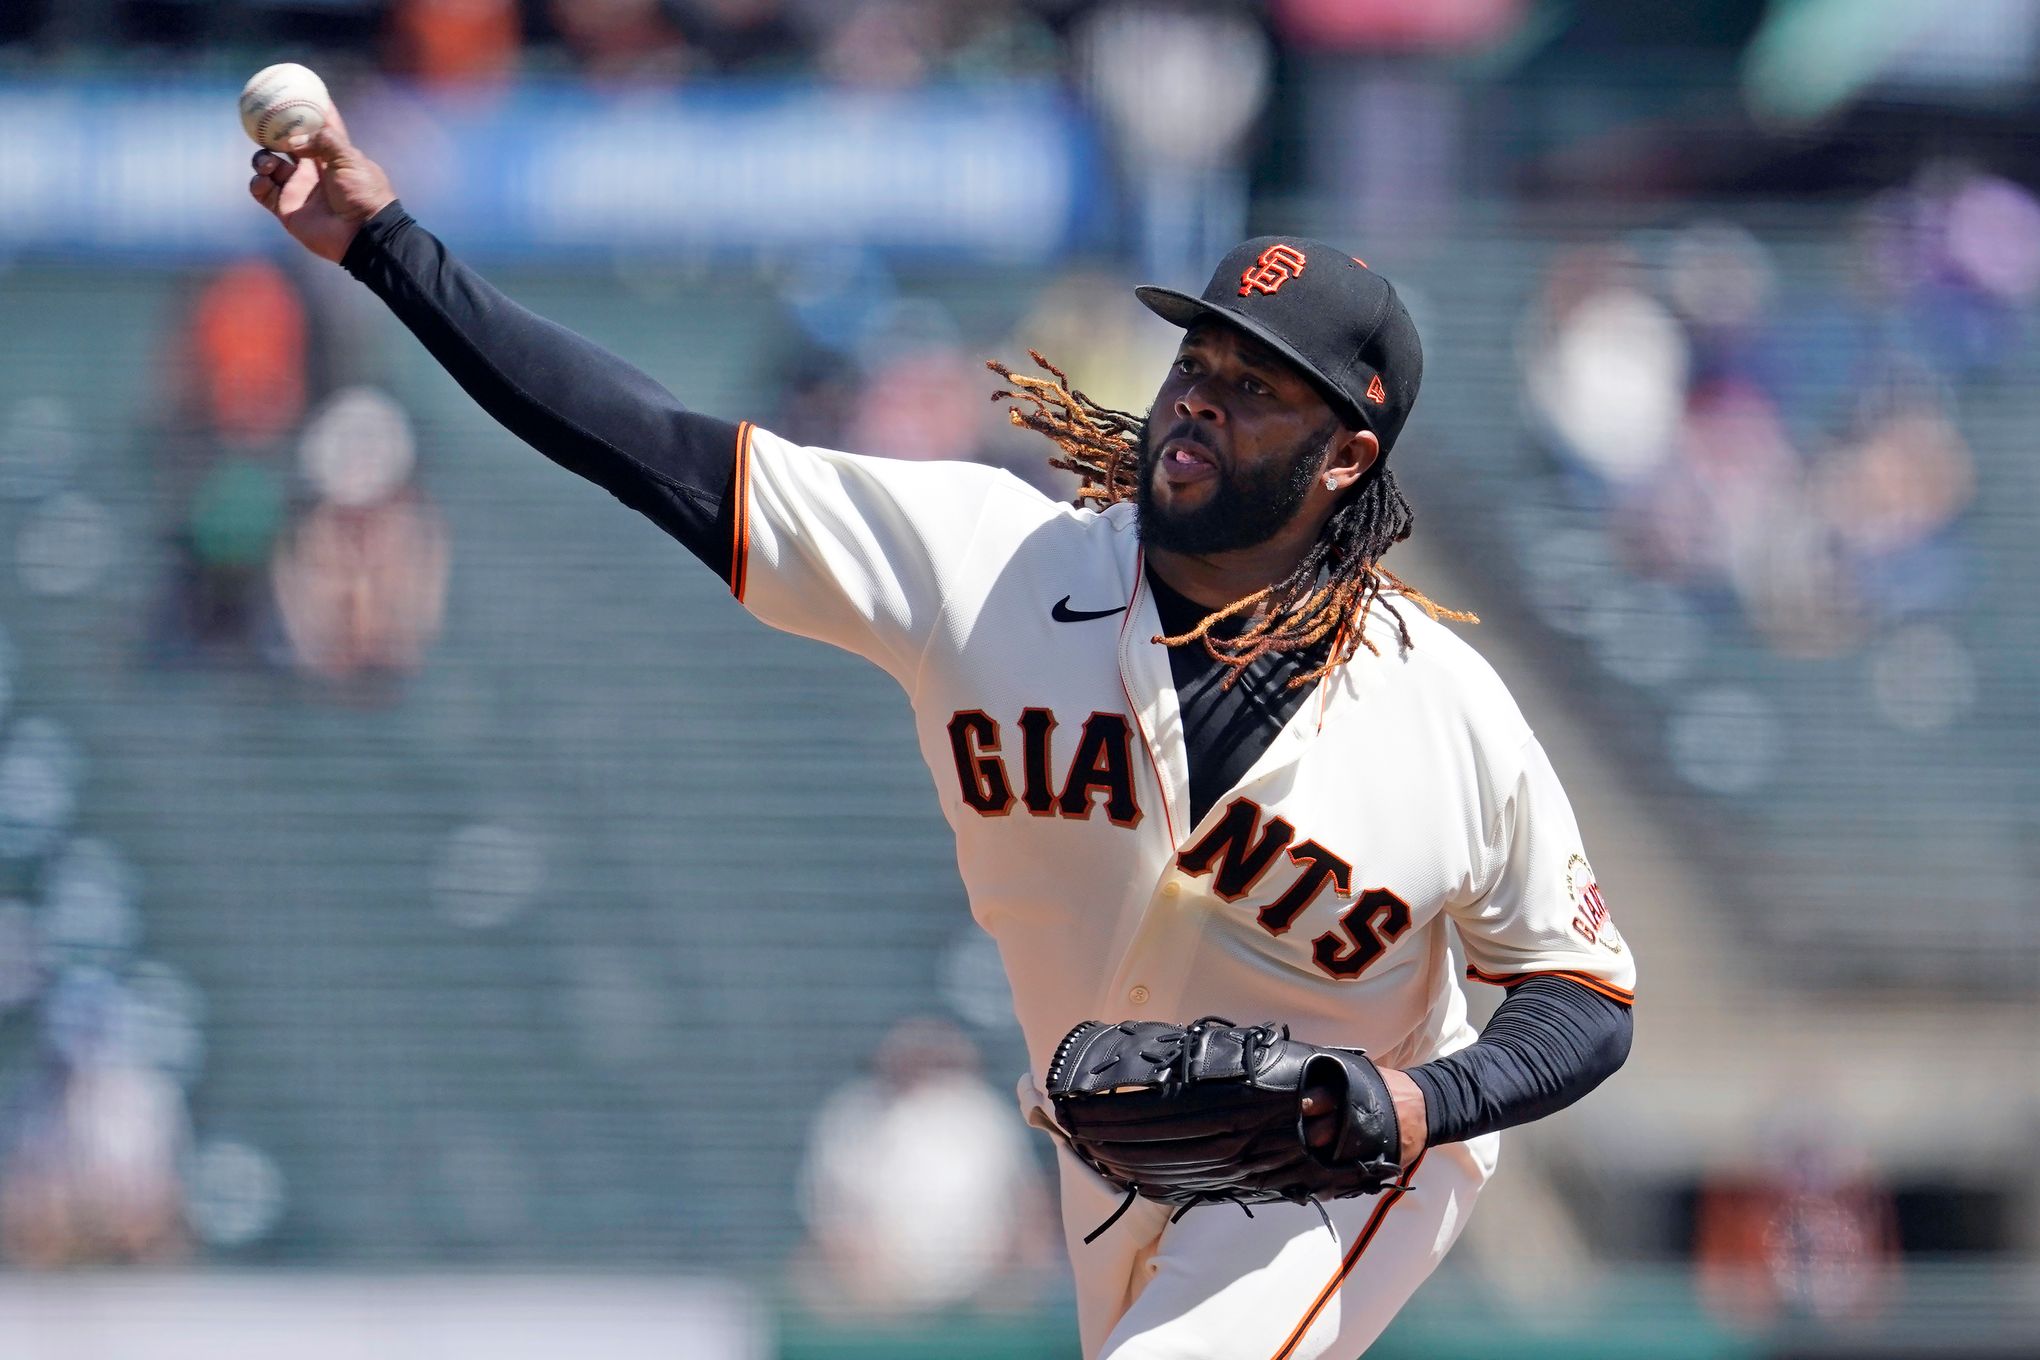 Local MLB update: Austin Slater stays on a tear for Giants